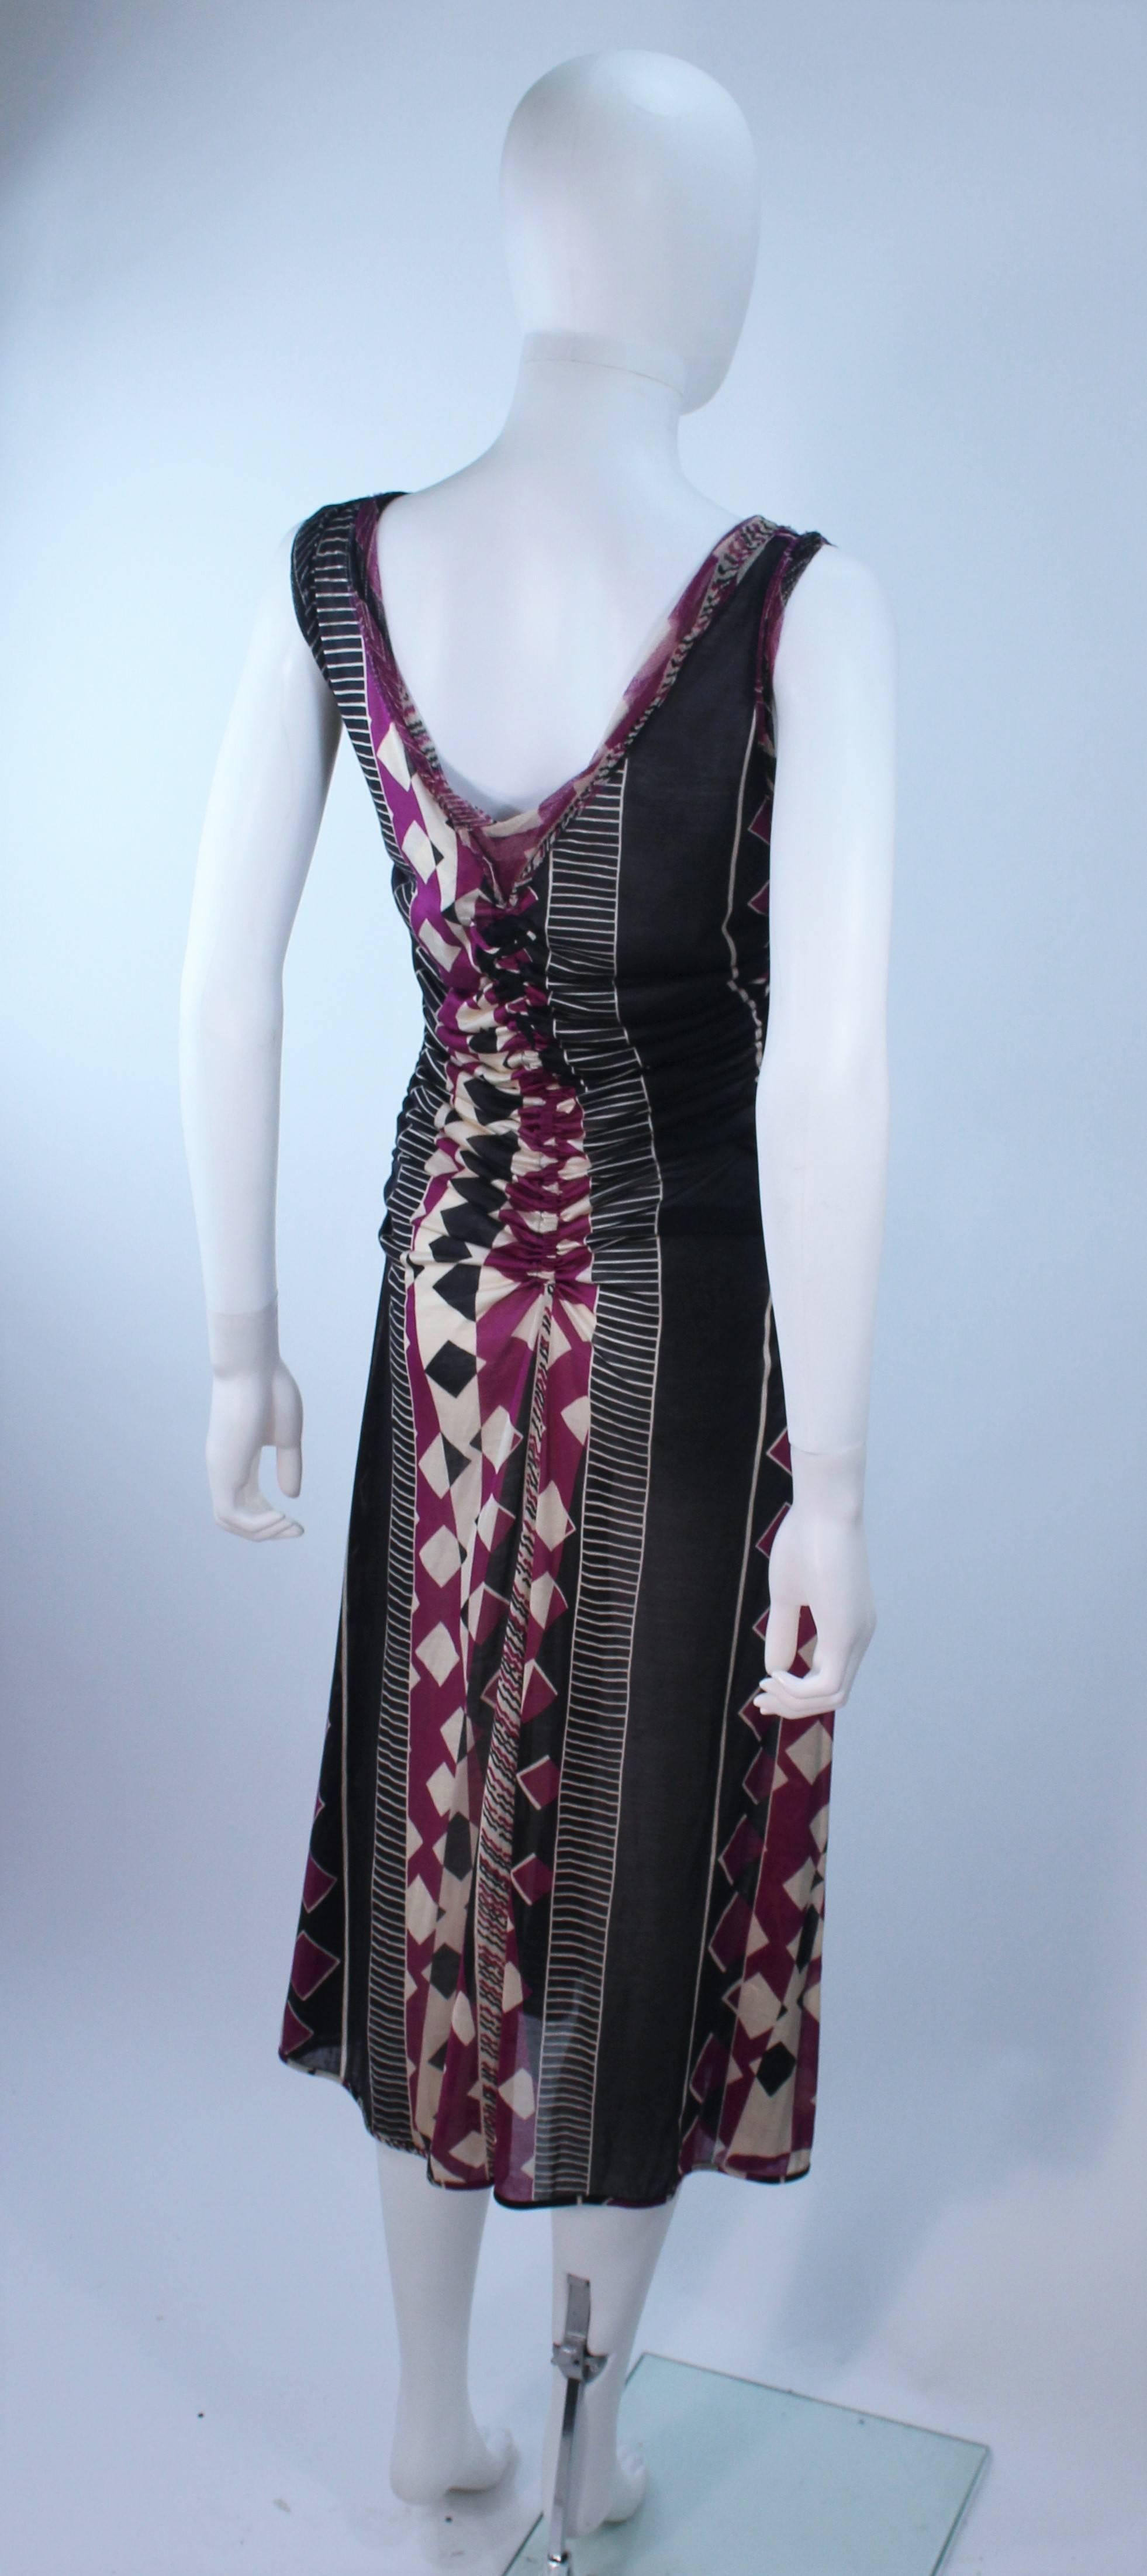 JEAN PAUL GAULTIER Sheer Pink and Black Geometric Pattern Cocktail Dress Size M 4